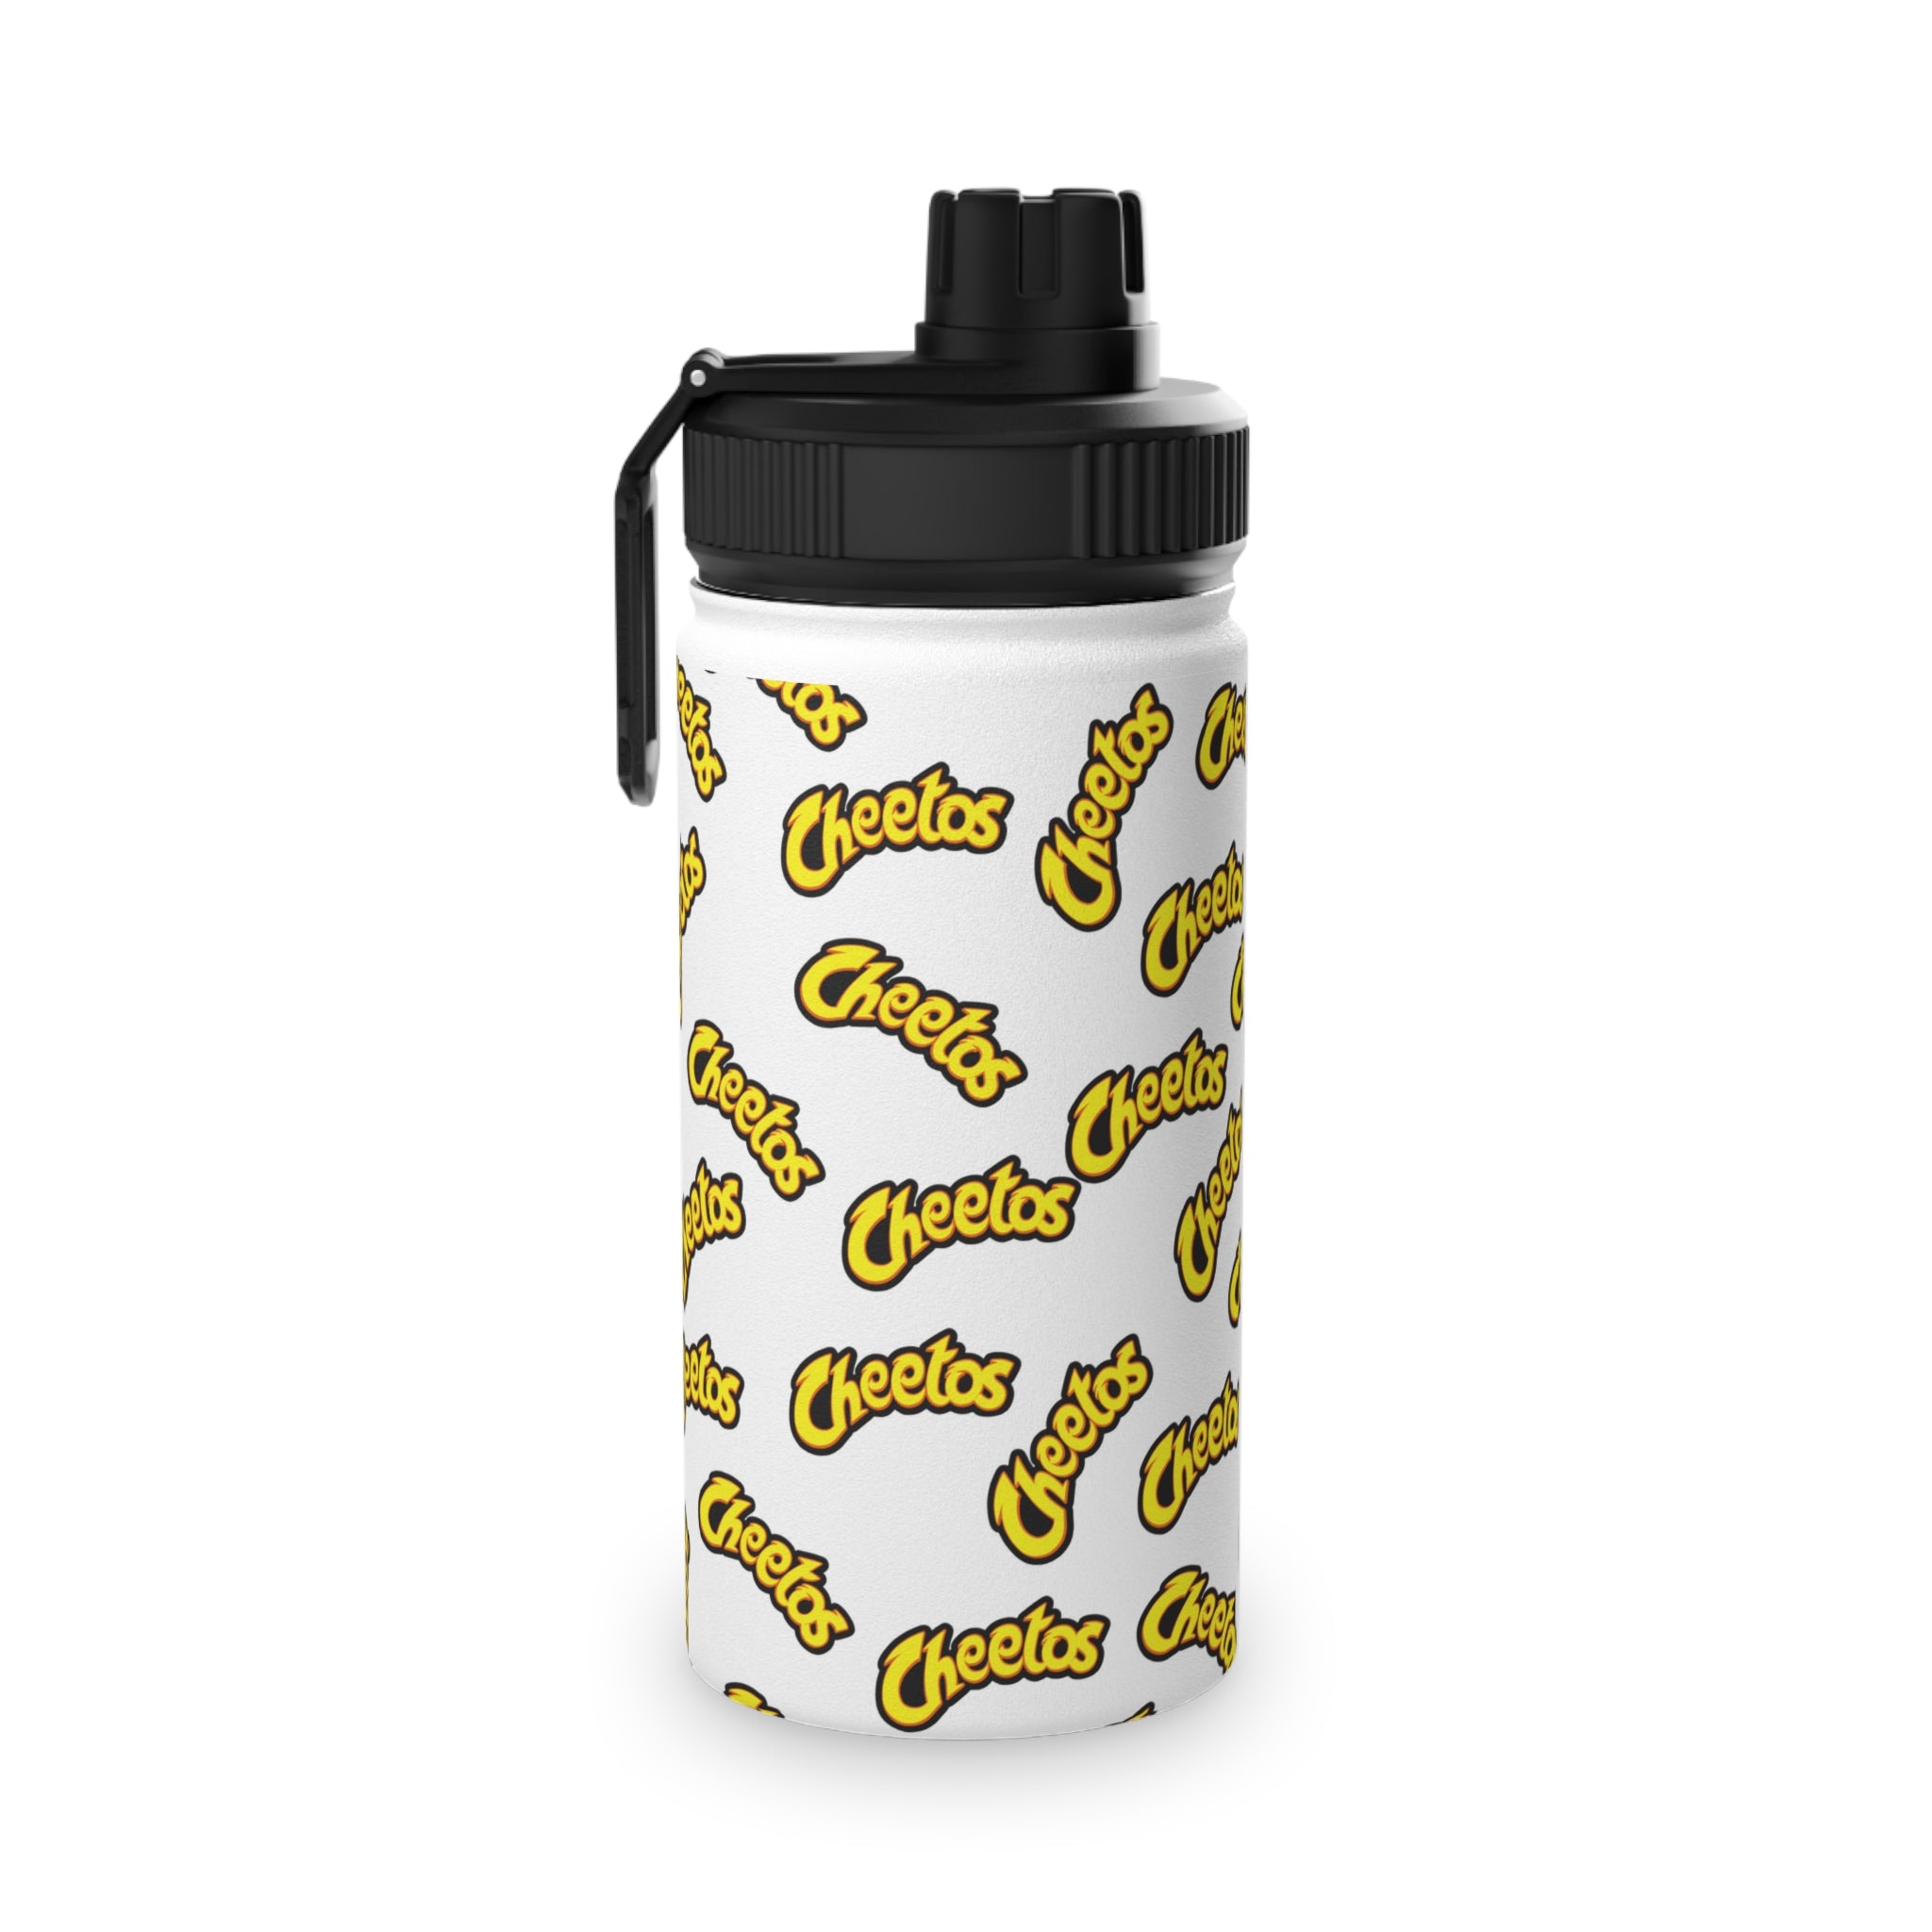 Cheetos Pattern Stainless Steel Water Bottle, Sports Lid